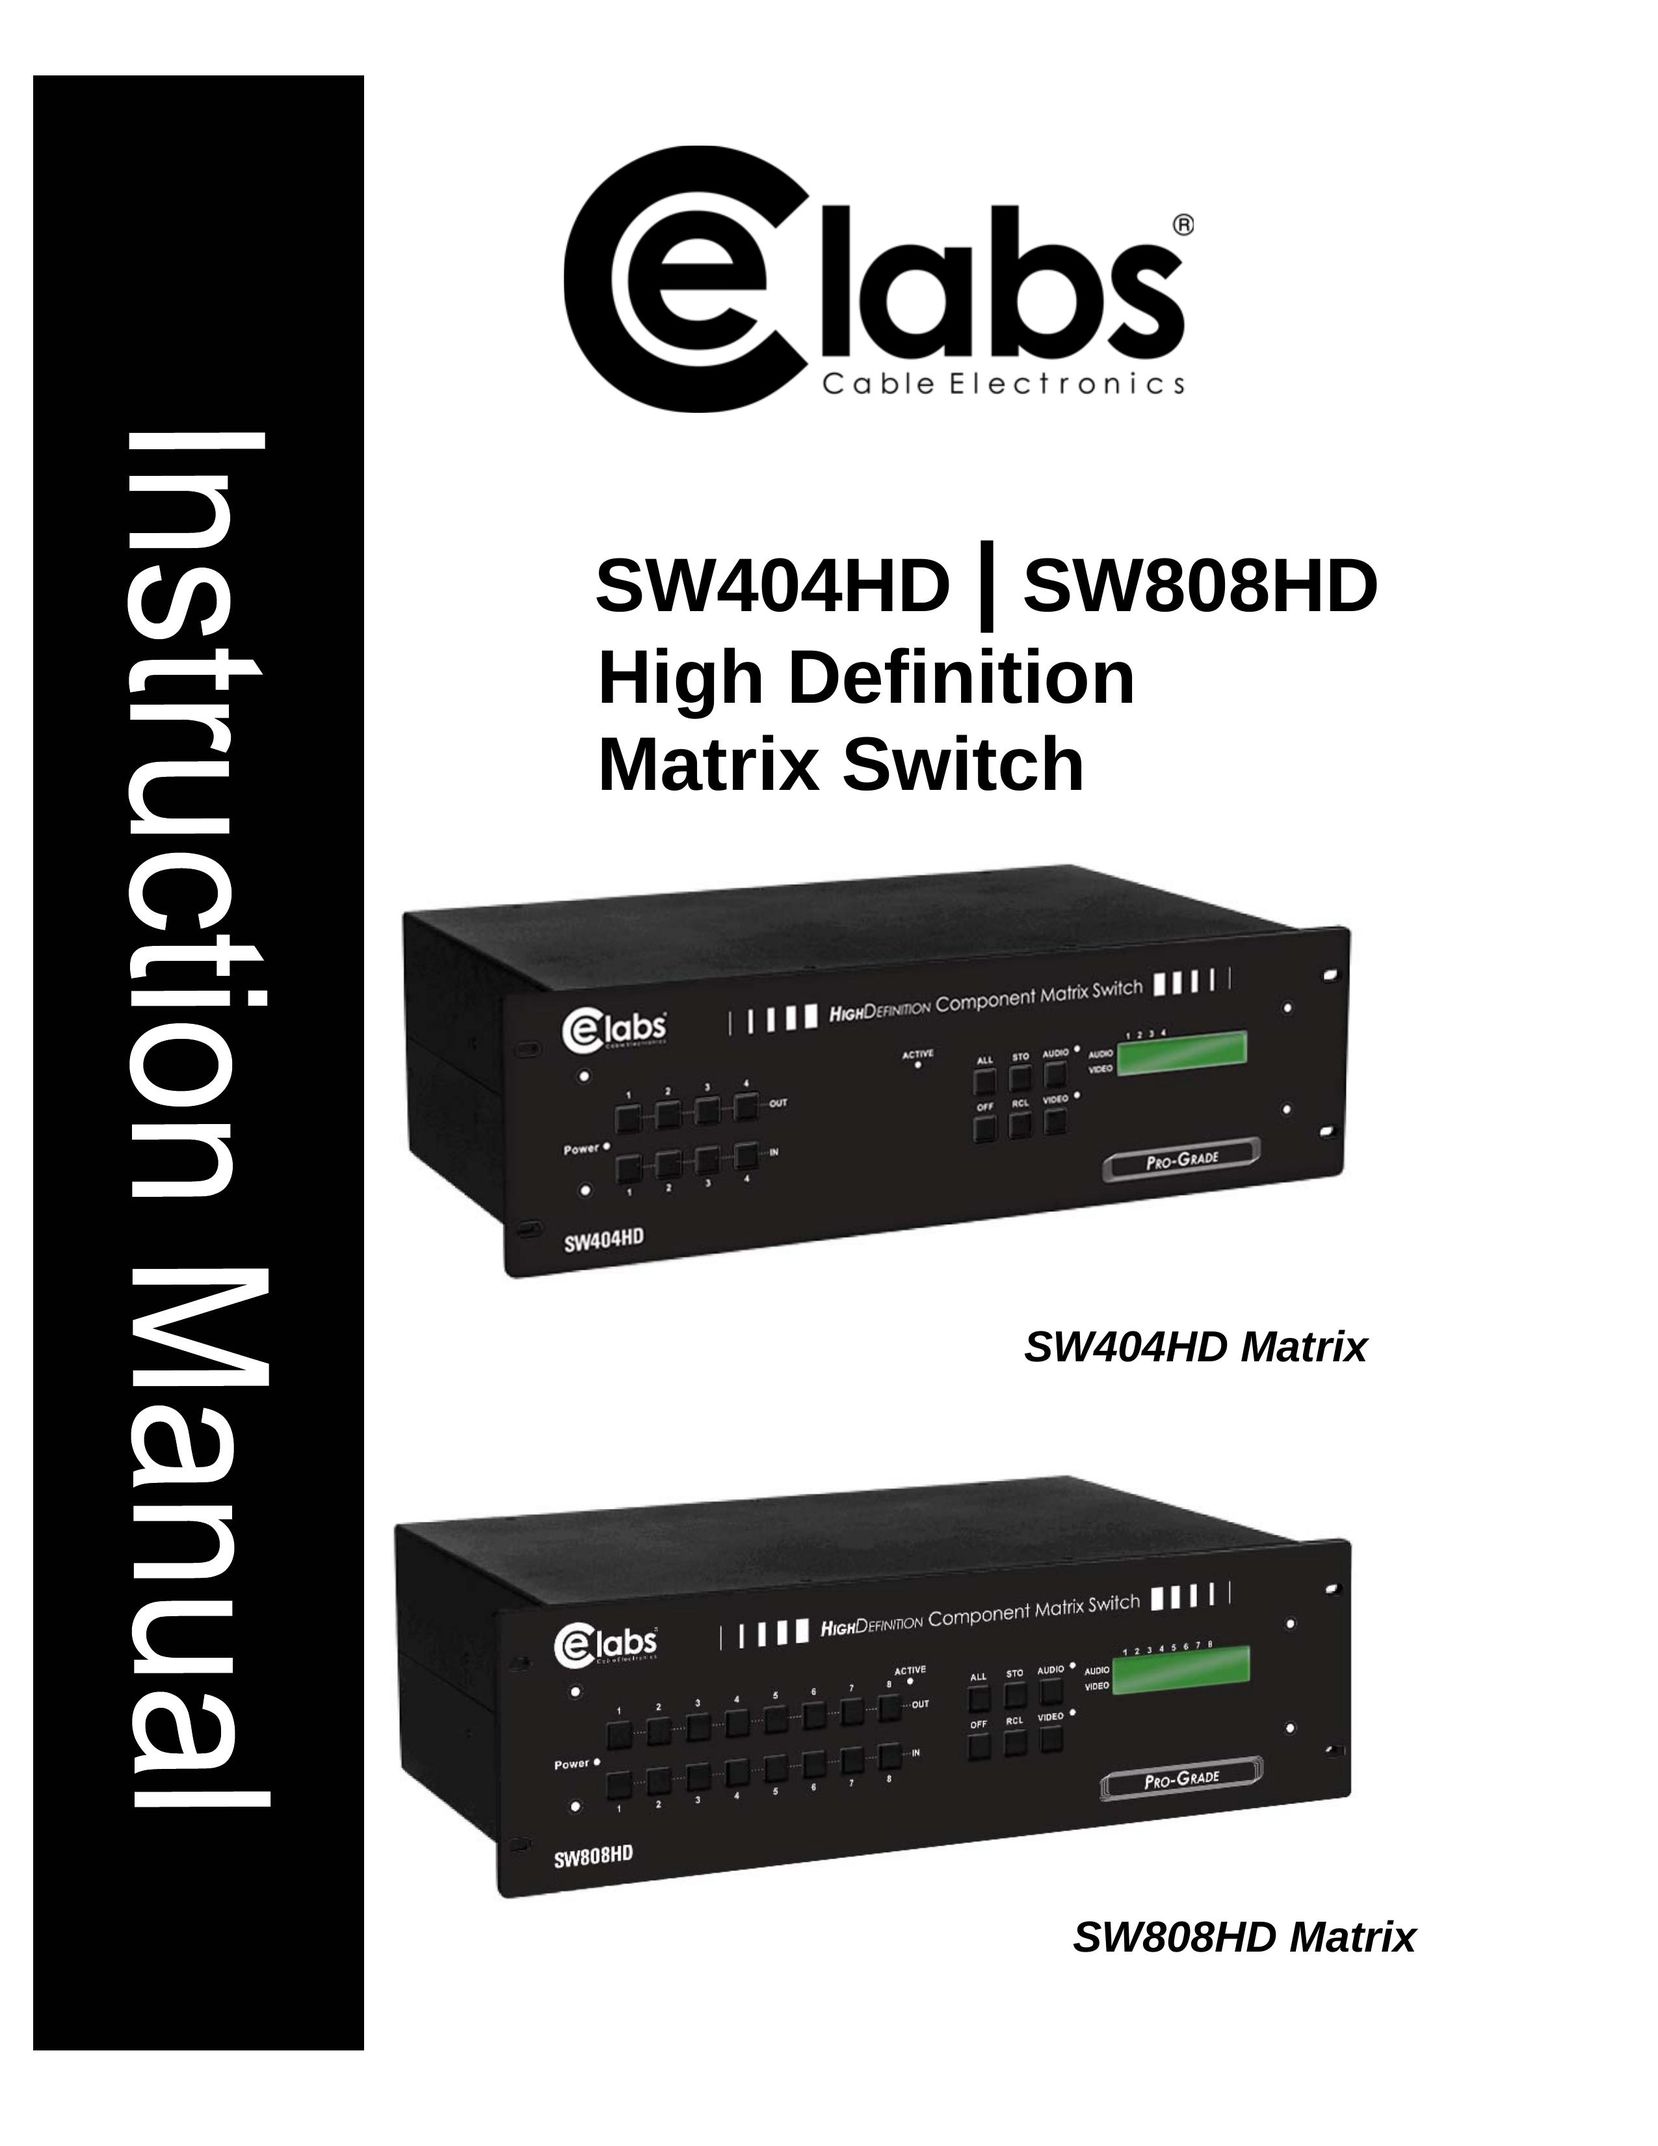 Cable Electronics SW404HD Switch User Manual